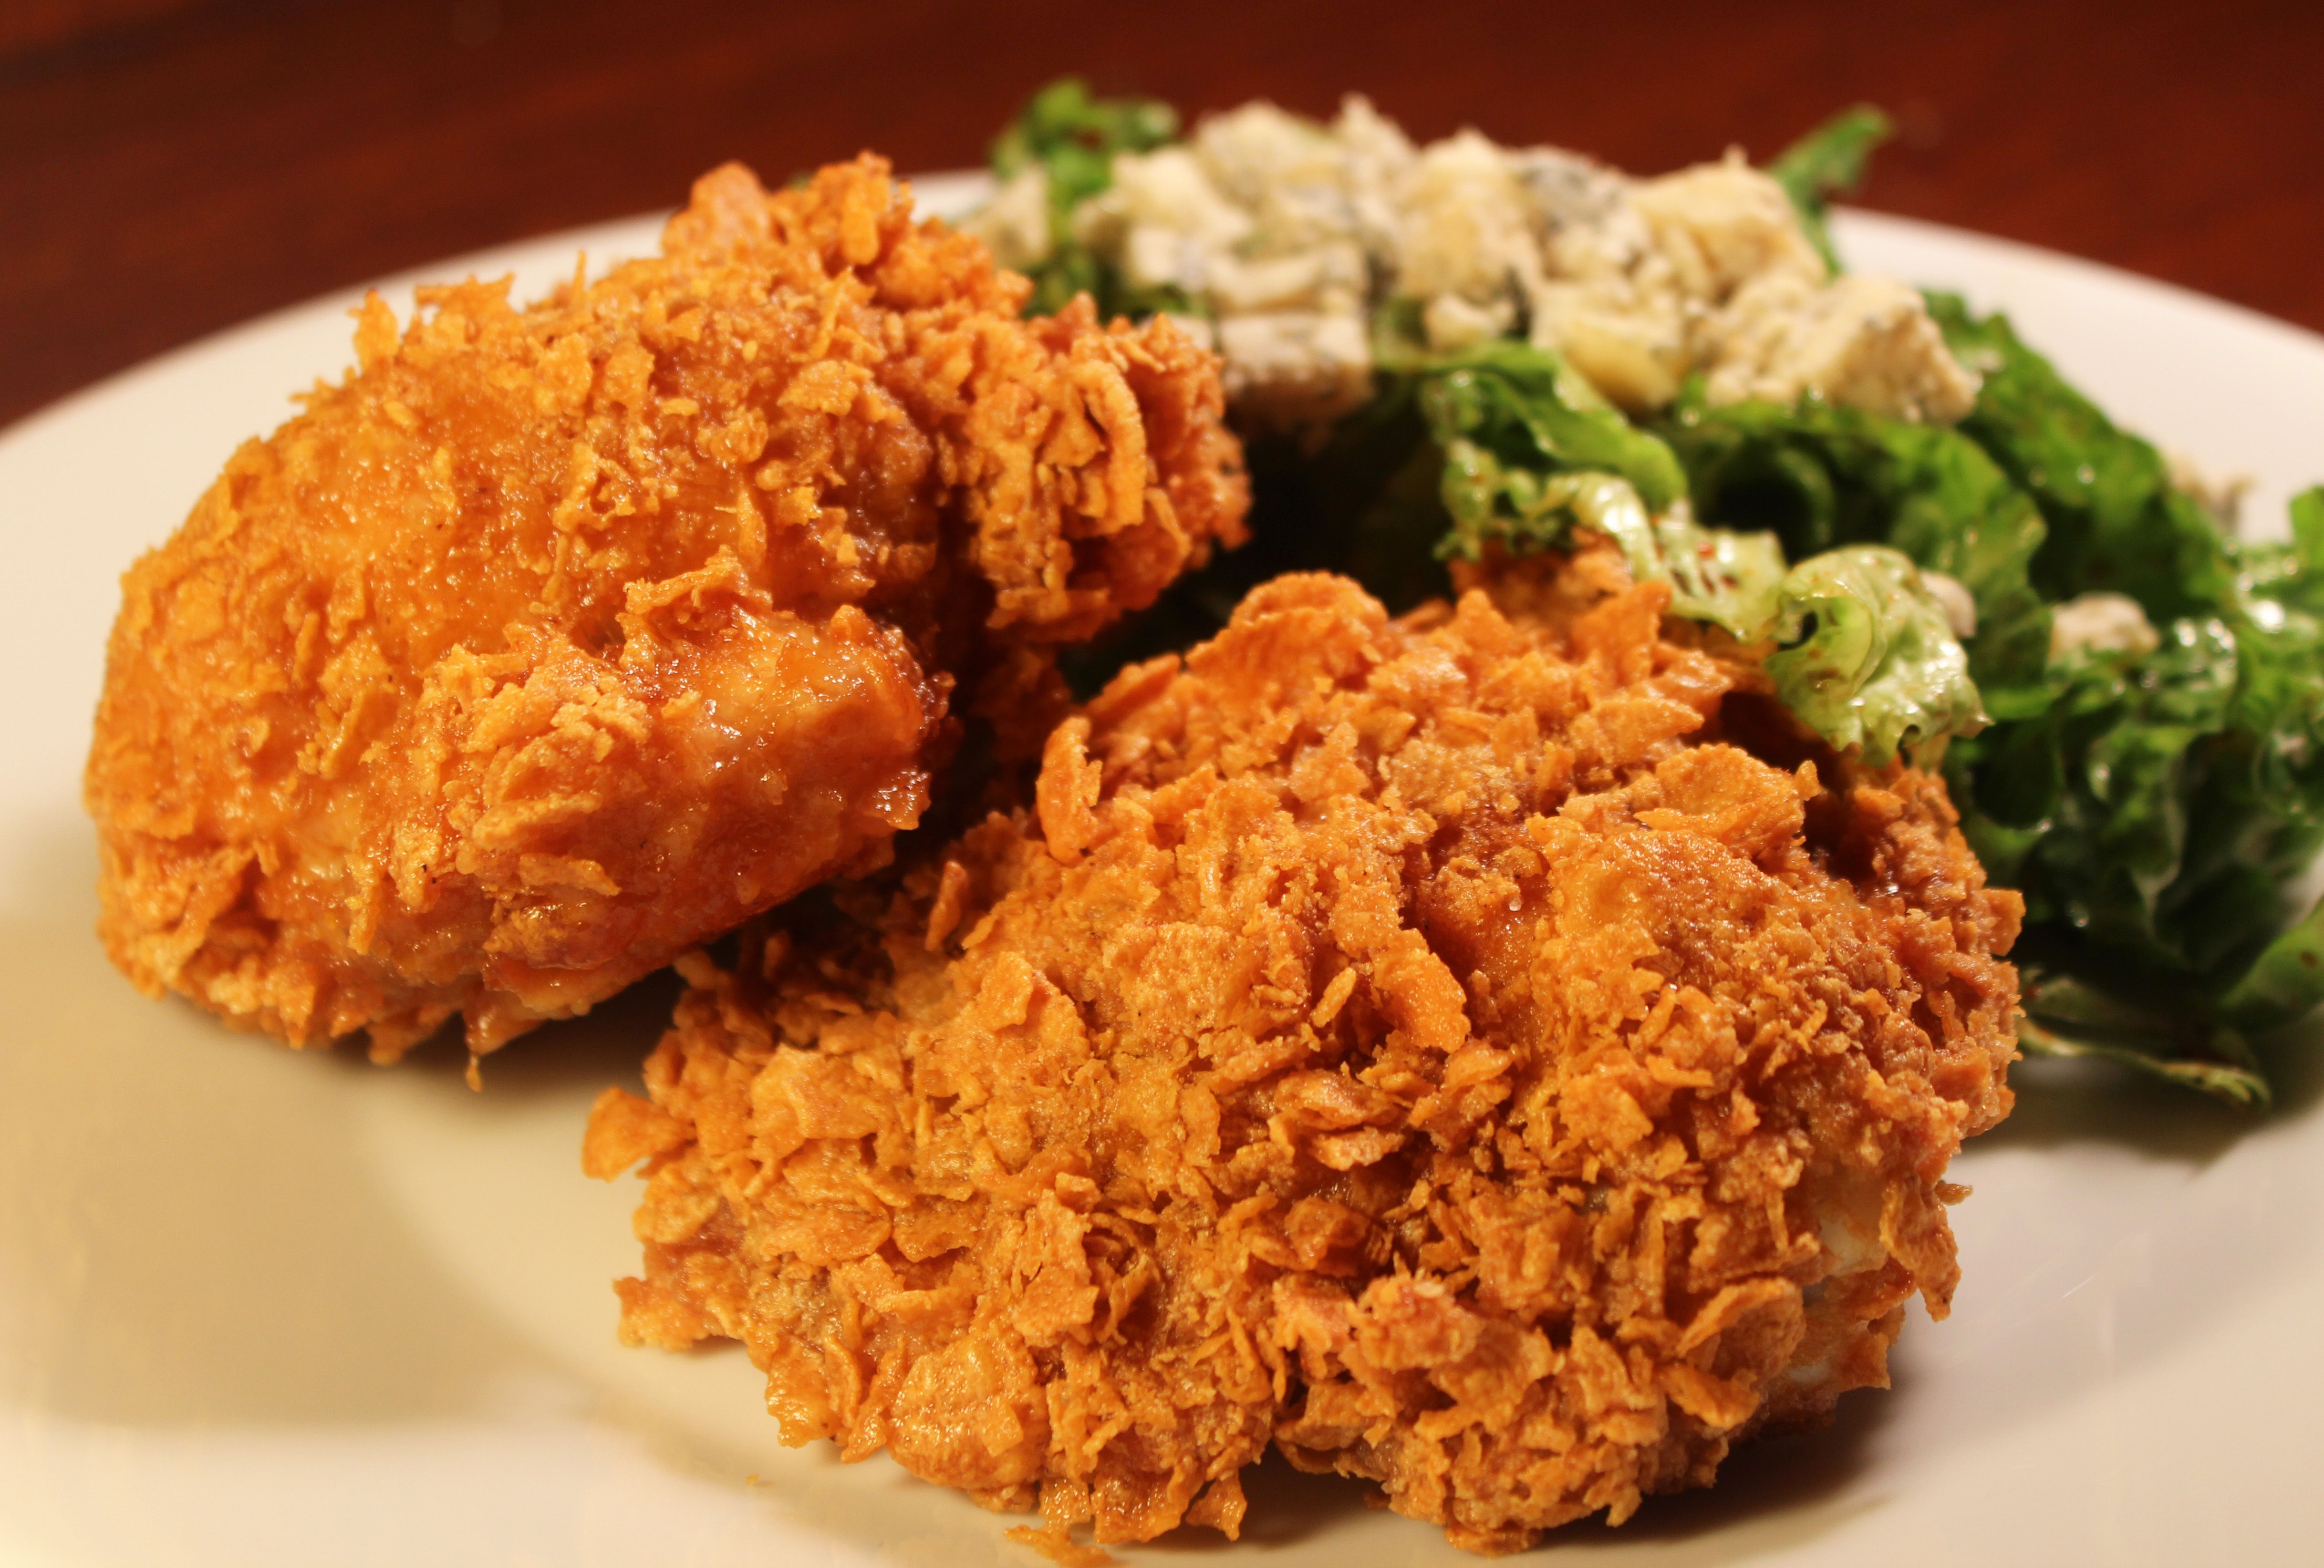 Fried Chicken Wallpaper Image Photo Picture Background